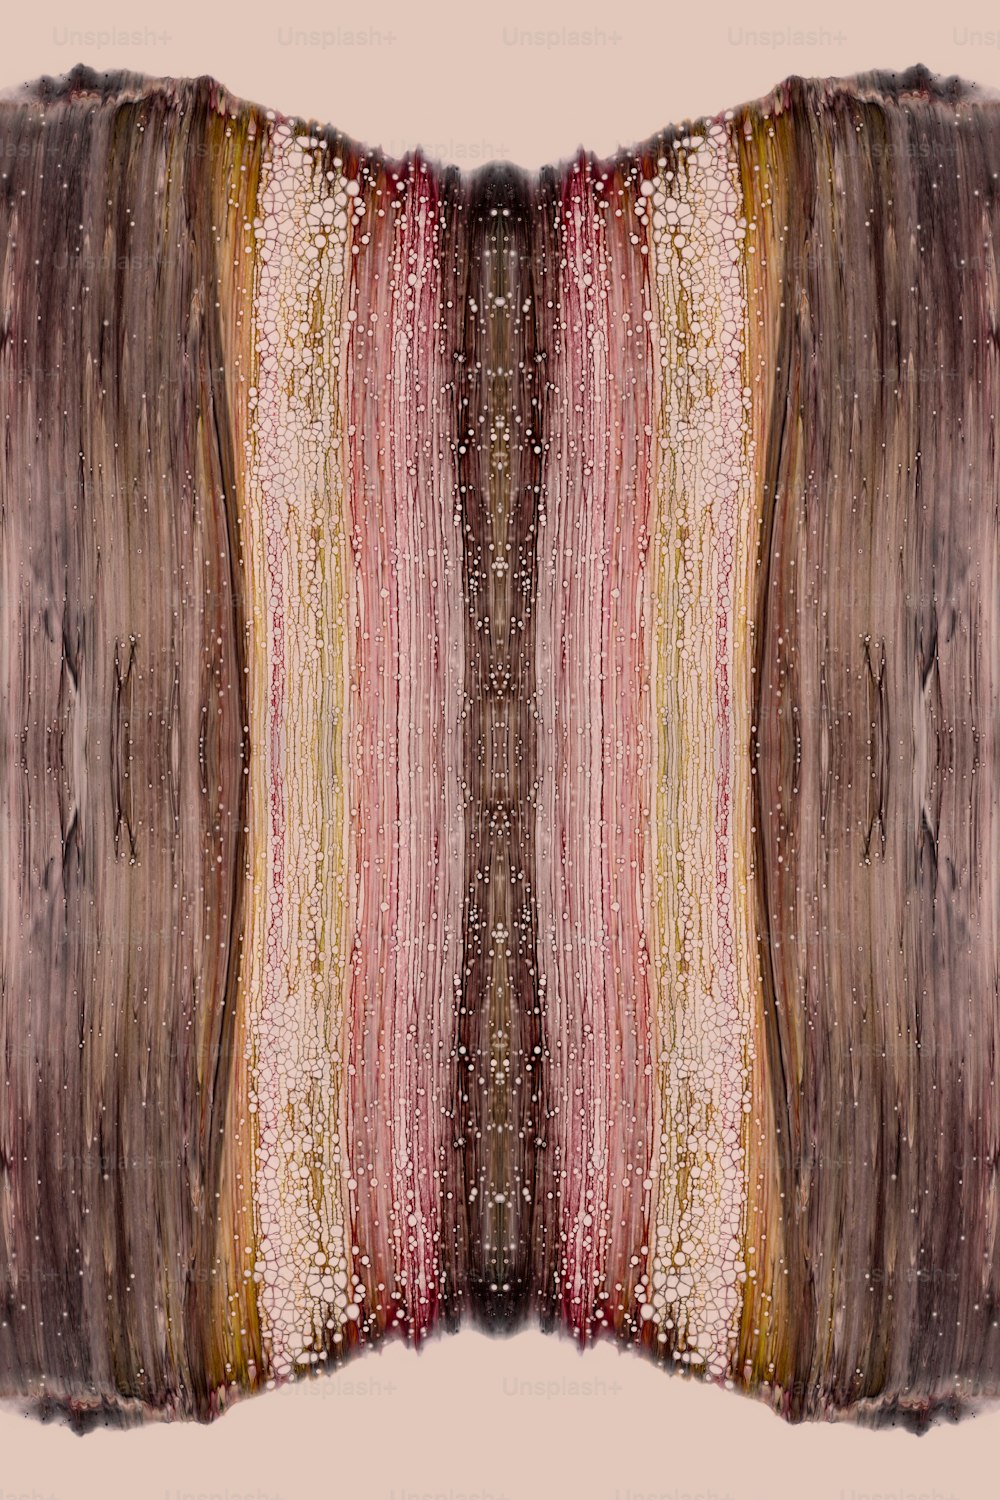 an abstract image of a wooden surface with a pink background